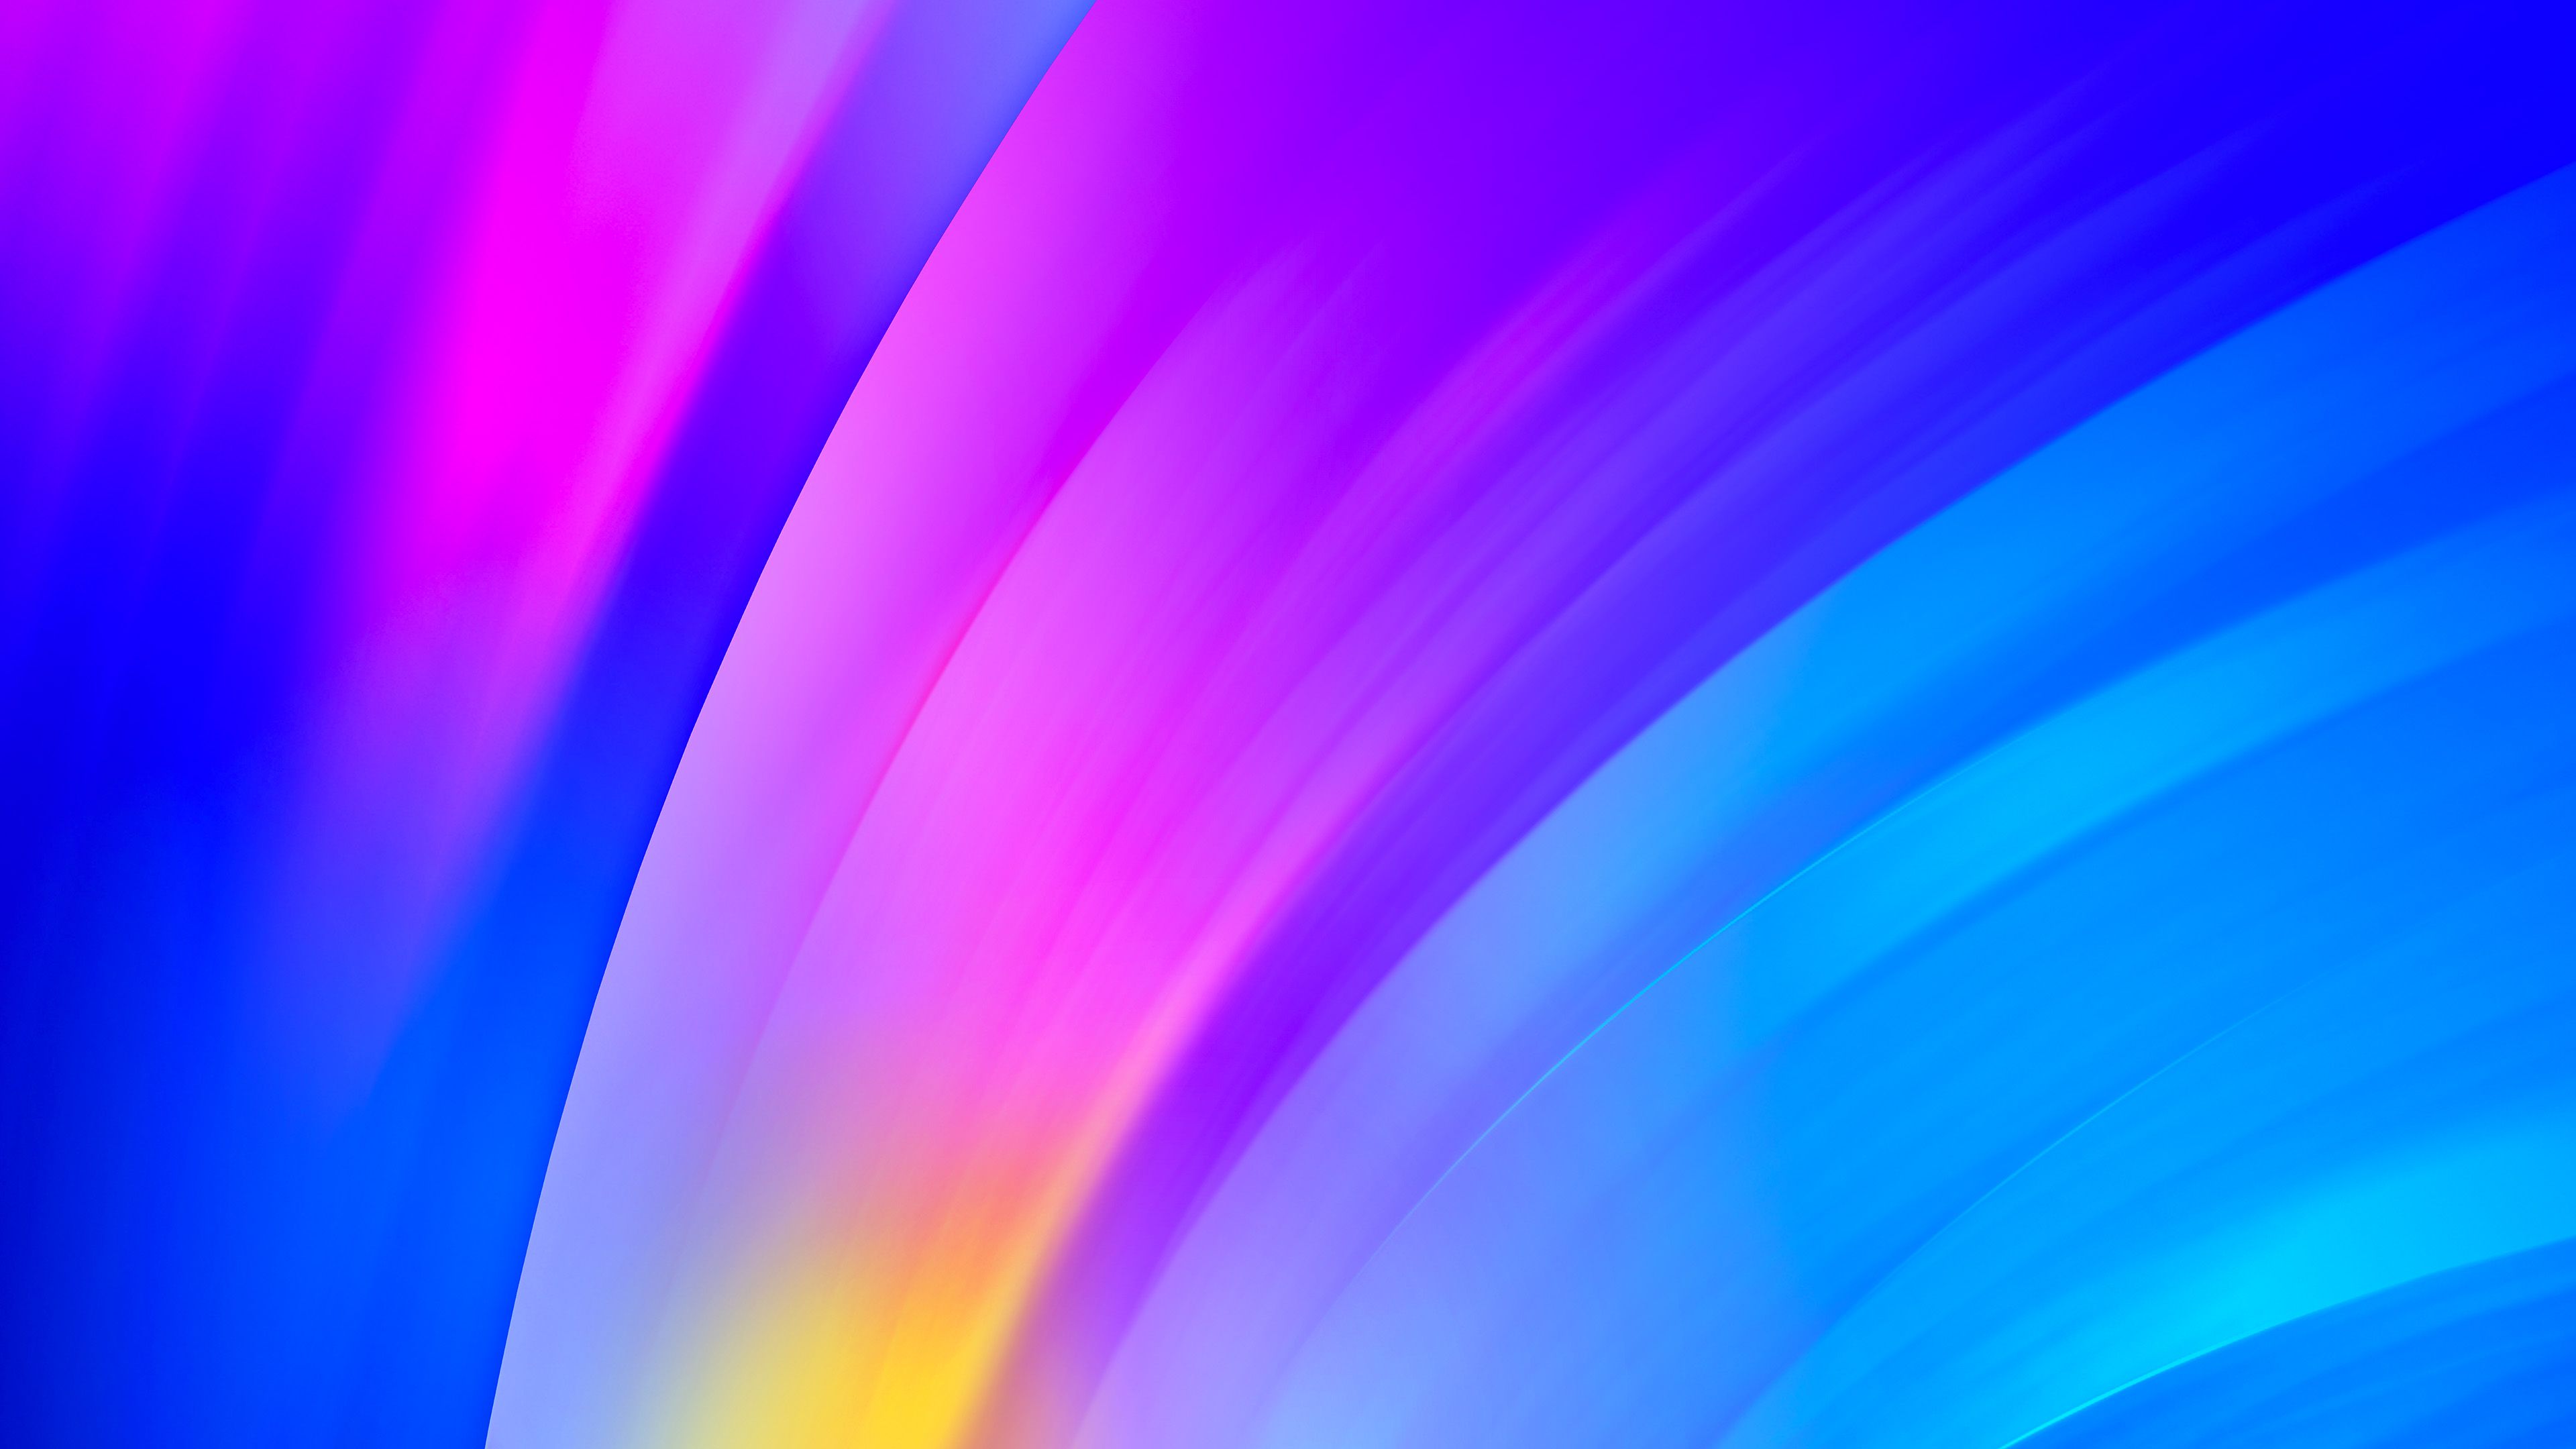 Abstract Gradient HD Wallpapers - Wallpaper Cave